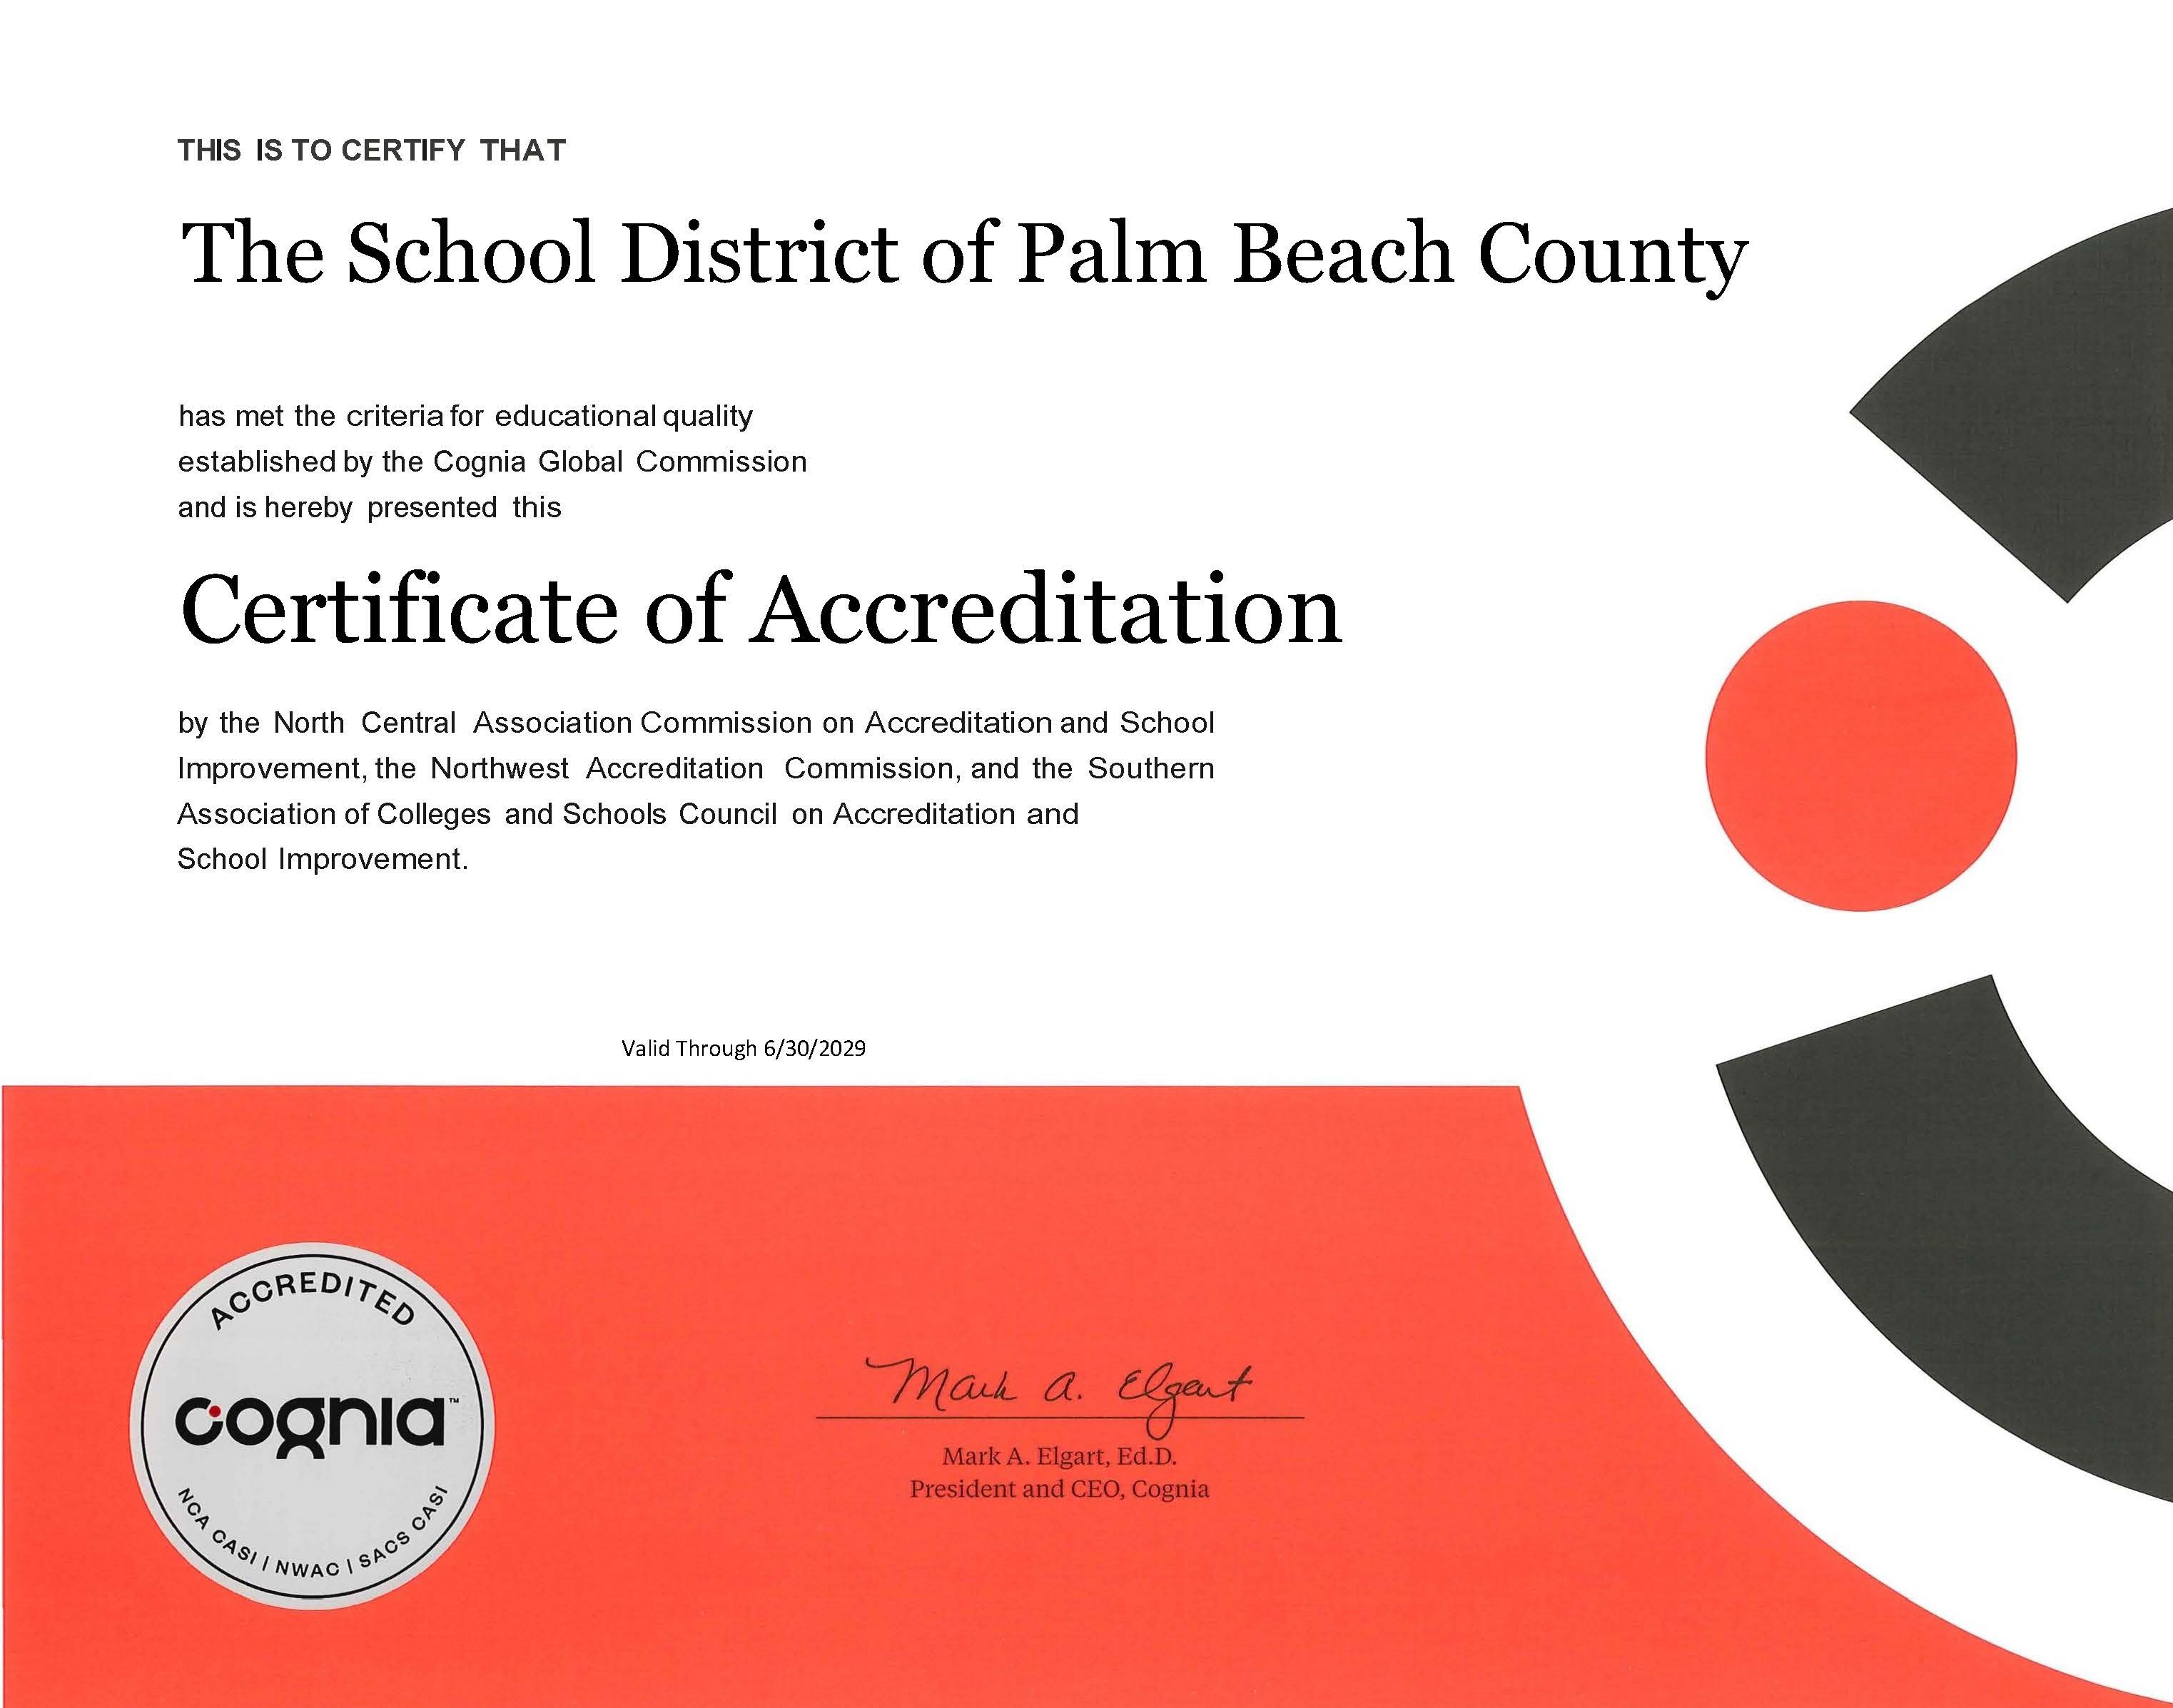 The School District of Palm Beach County Certificate of Accrediation